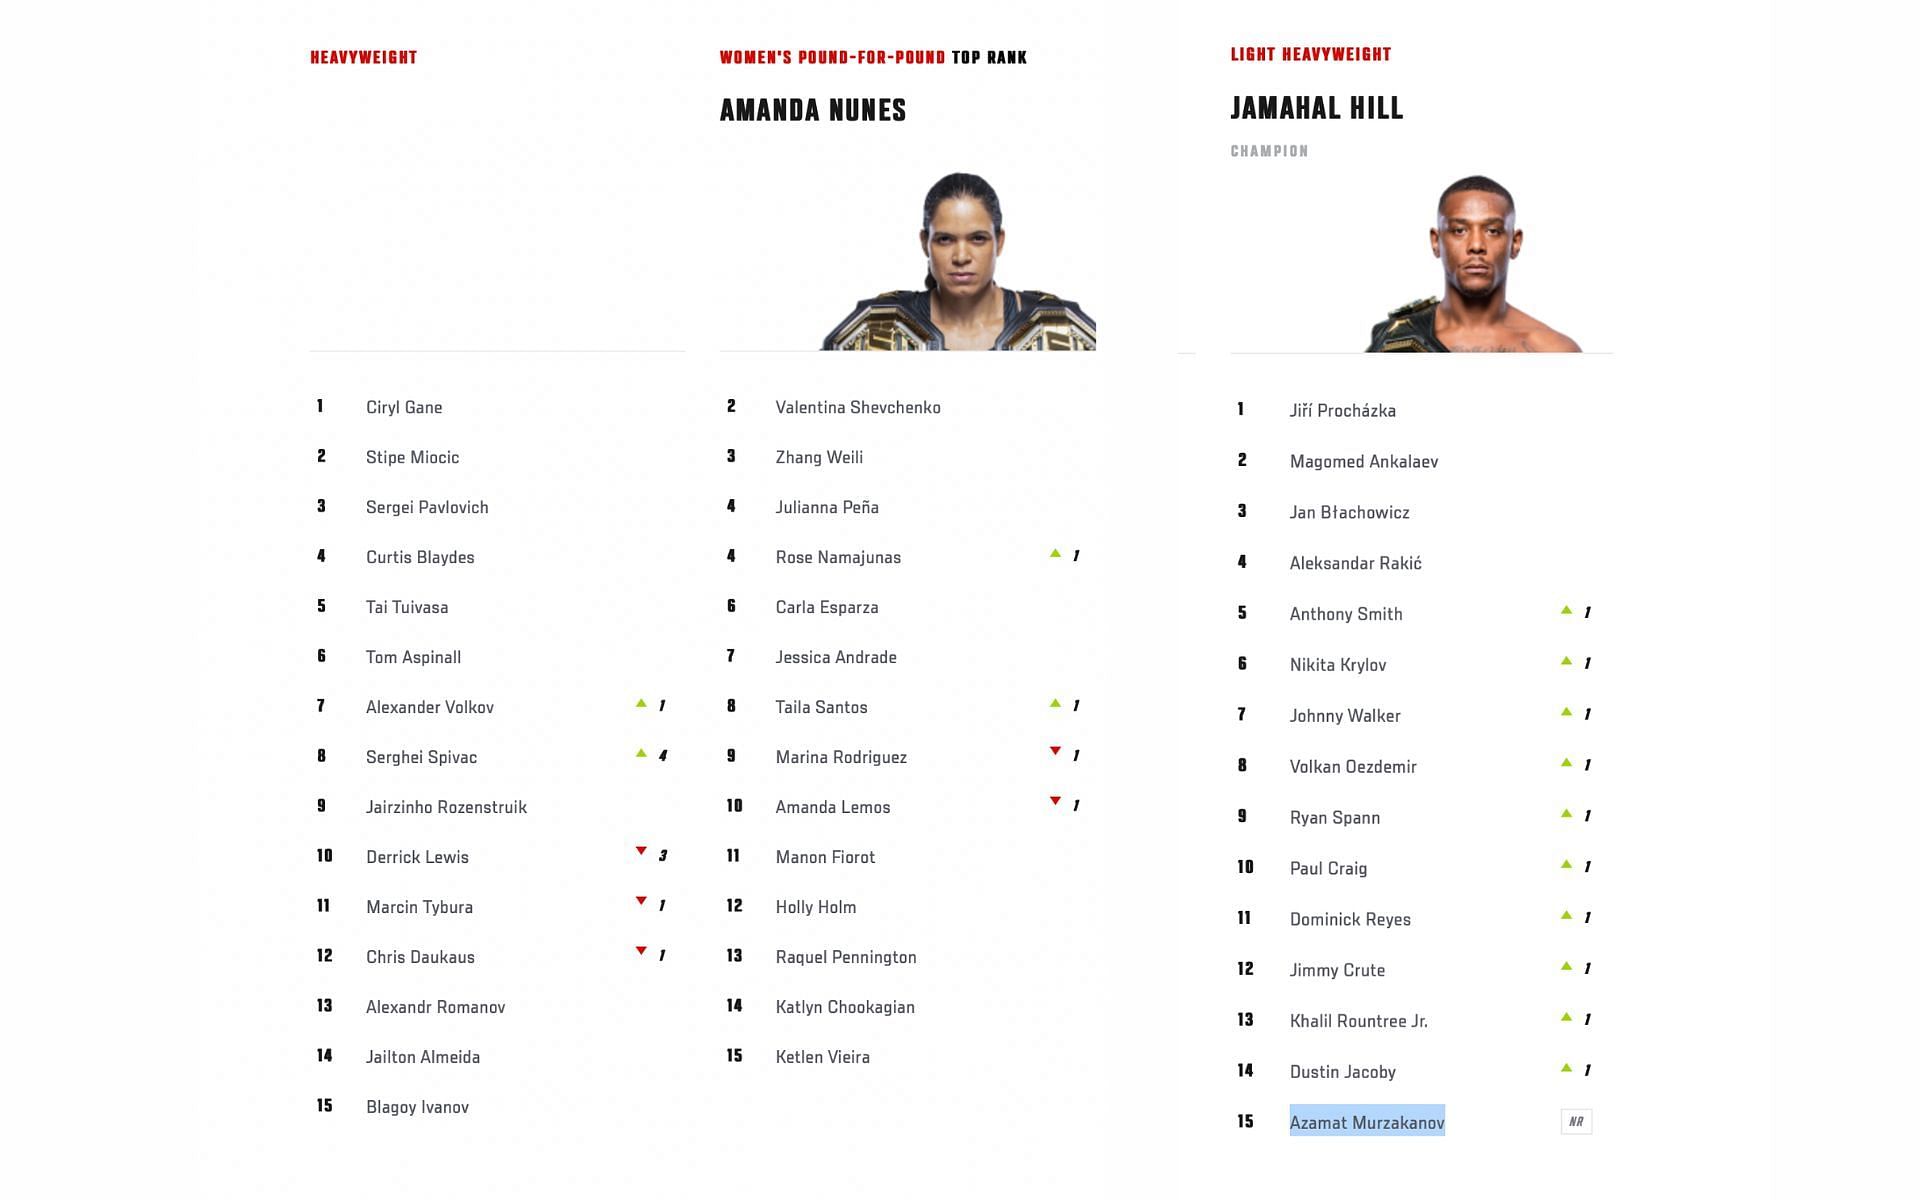 Heavyweight division [Left] Women&#039;s p4p [Center] LHW Division [Right] [Image courtesy: www.ufc.com]